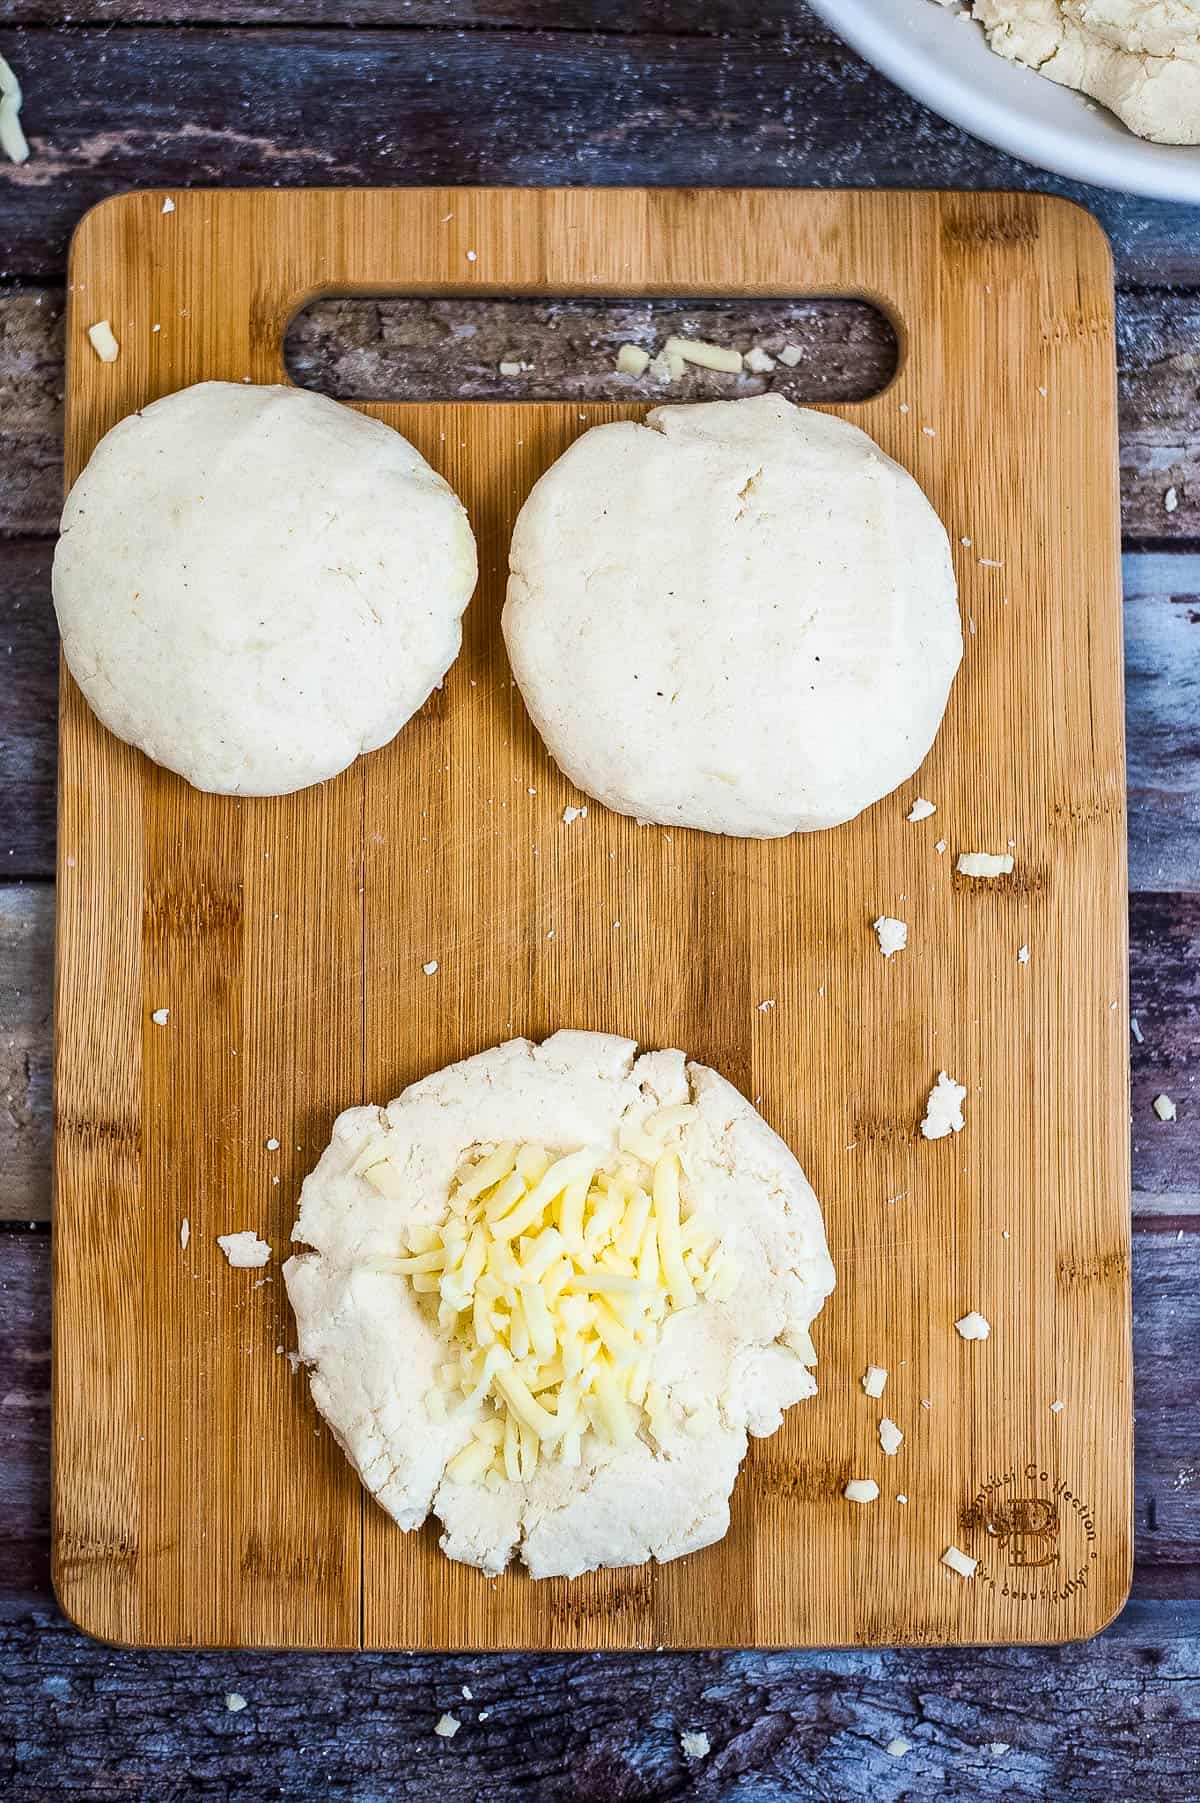 A wooden cutting board with dough and cheese for an arepas recipe.